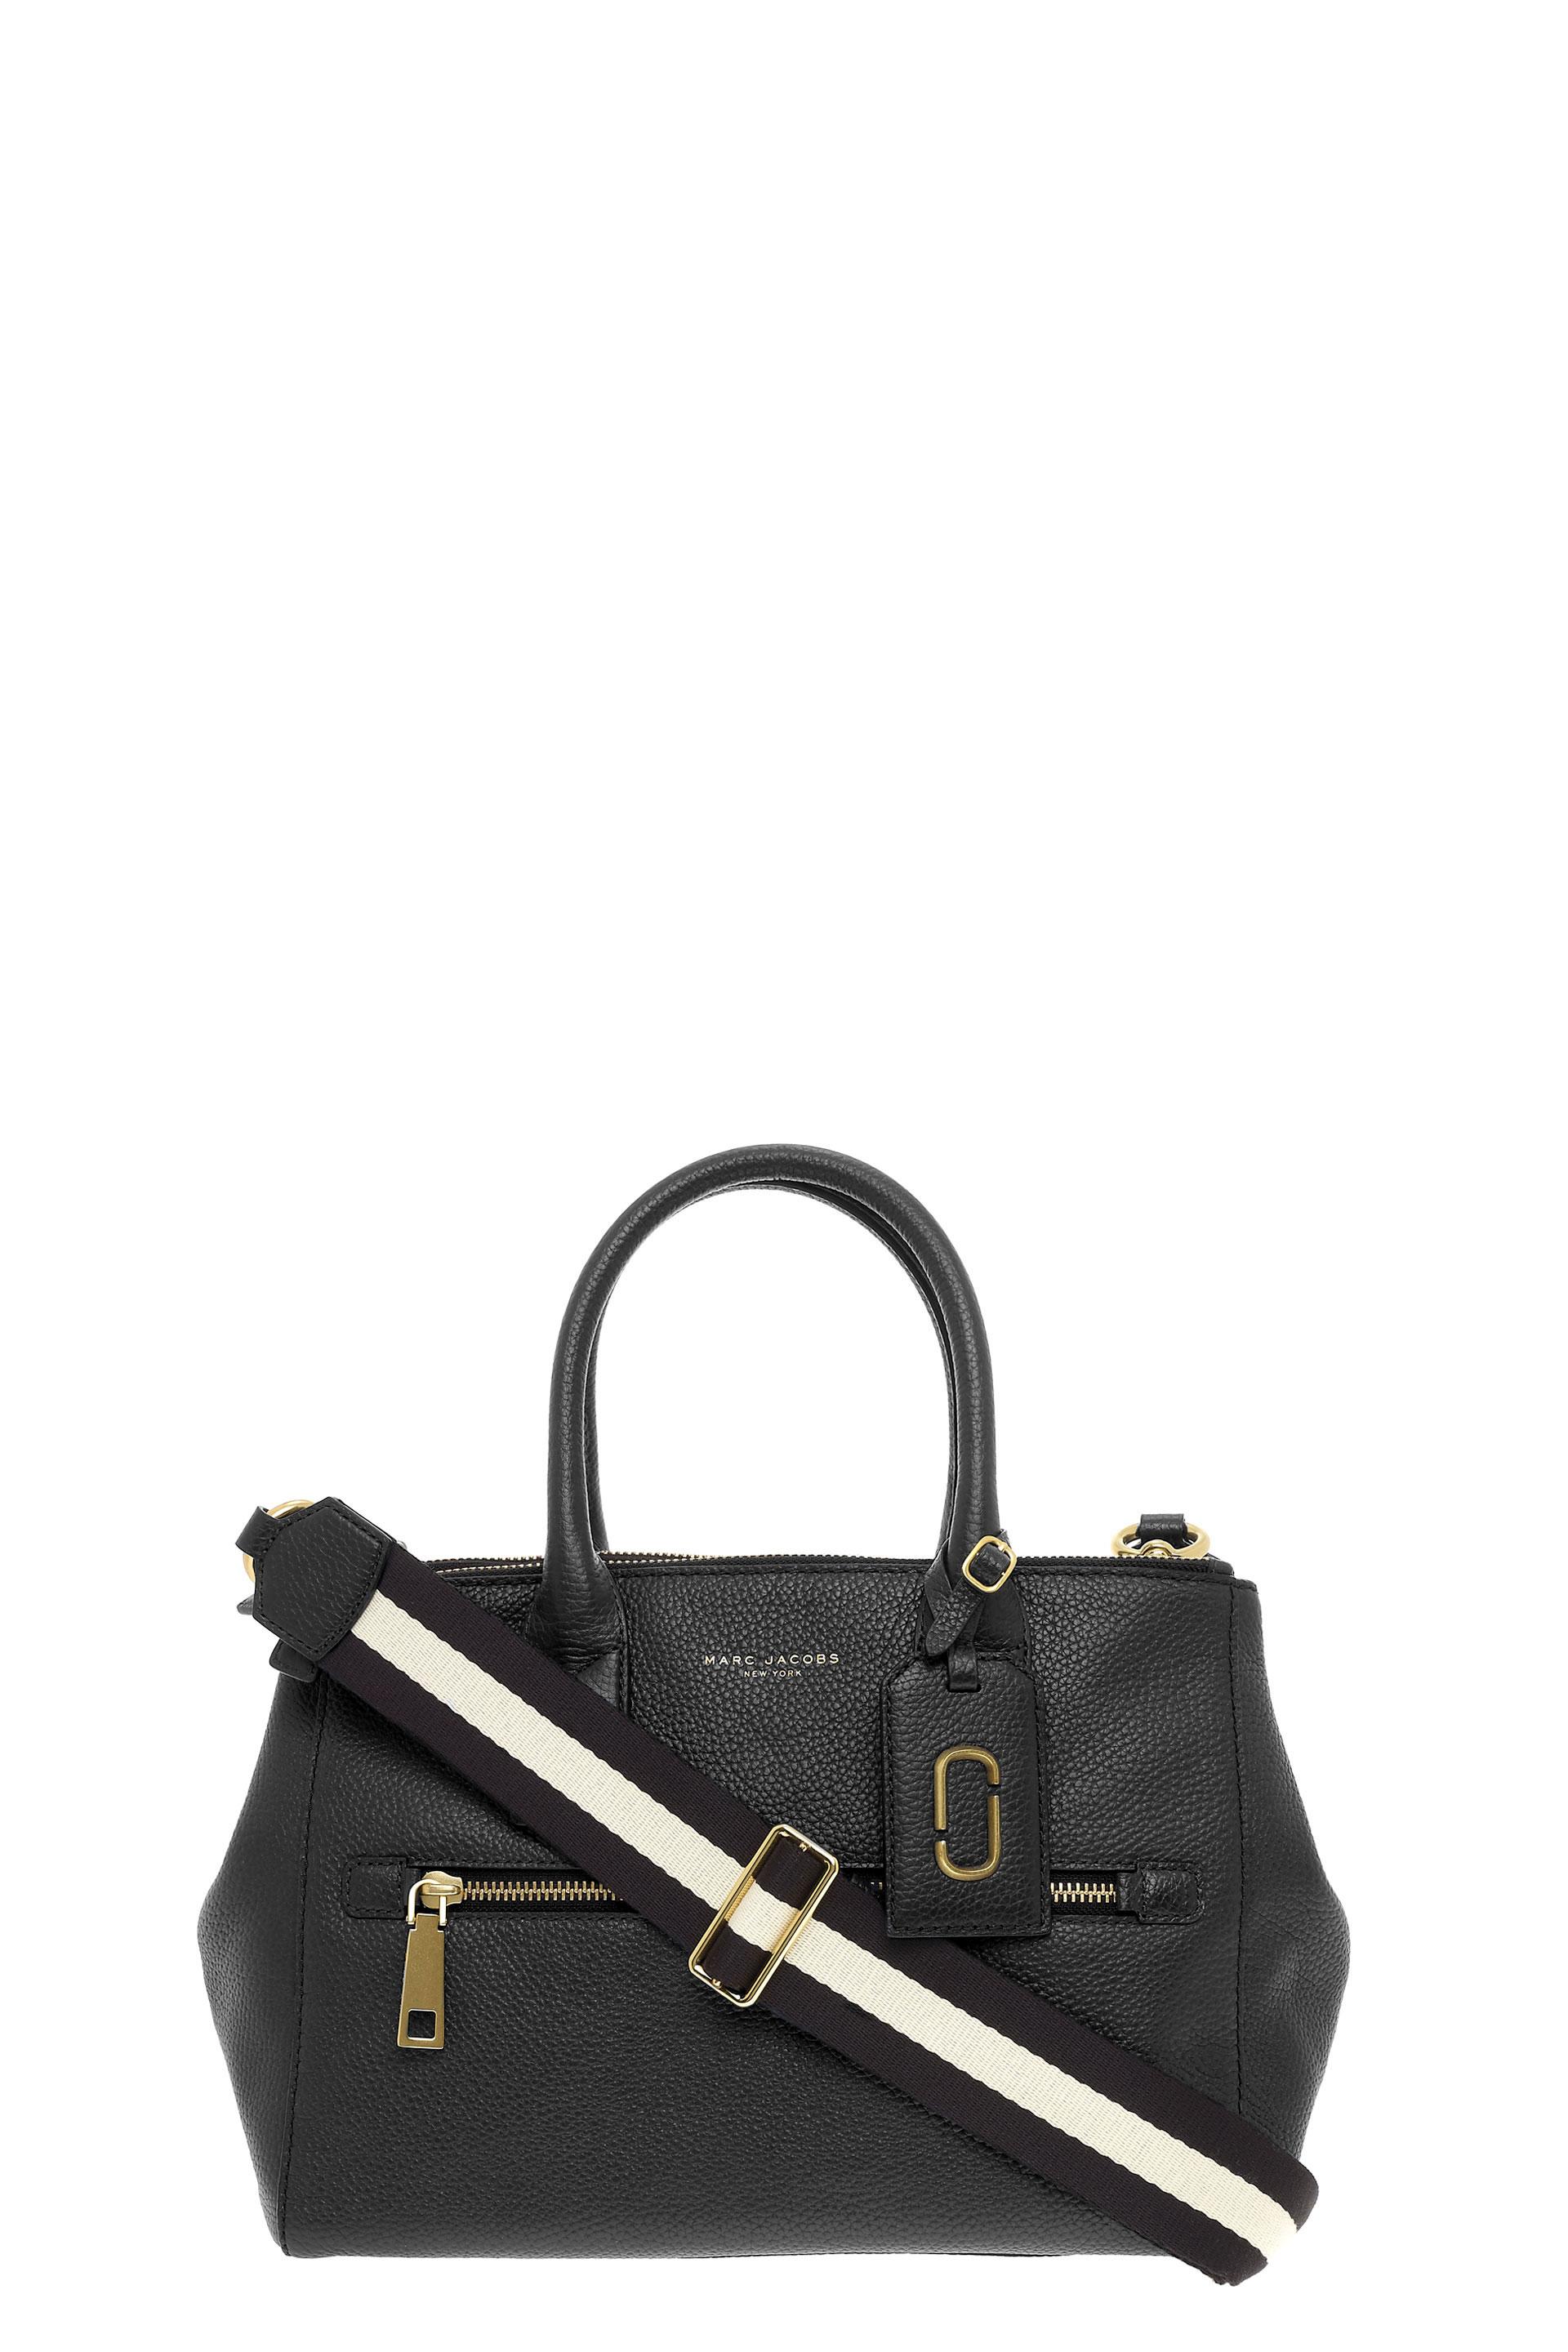 MARC JACOBS Gotham East-West Leather Tote Bag